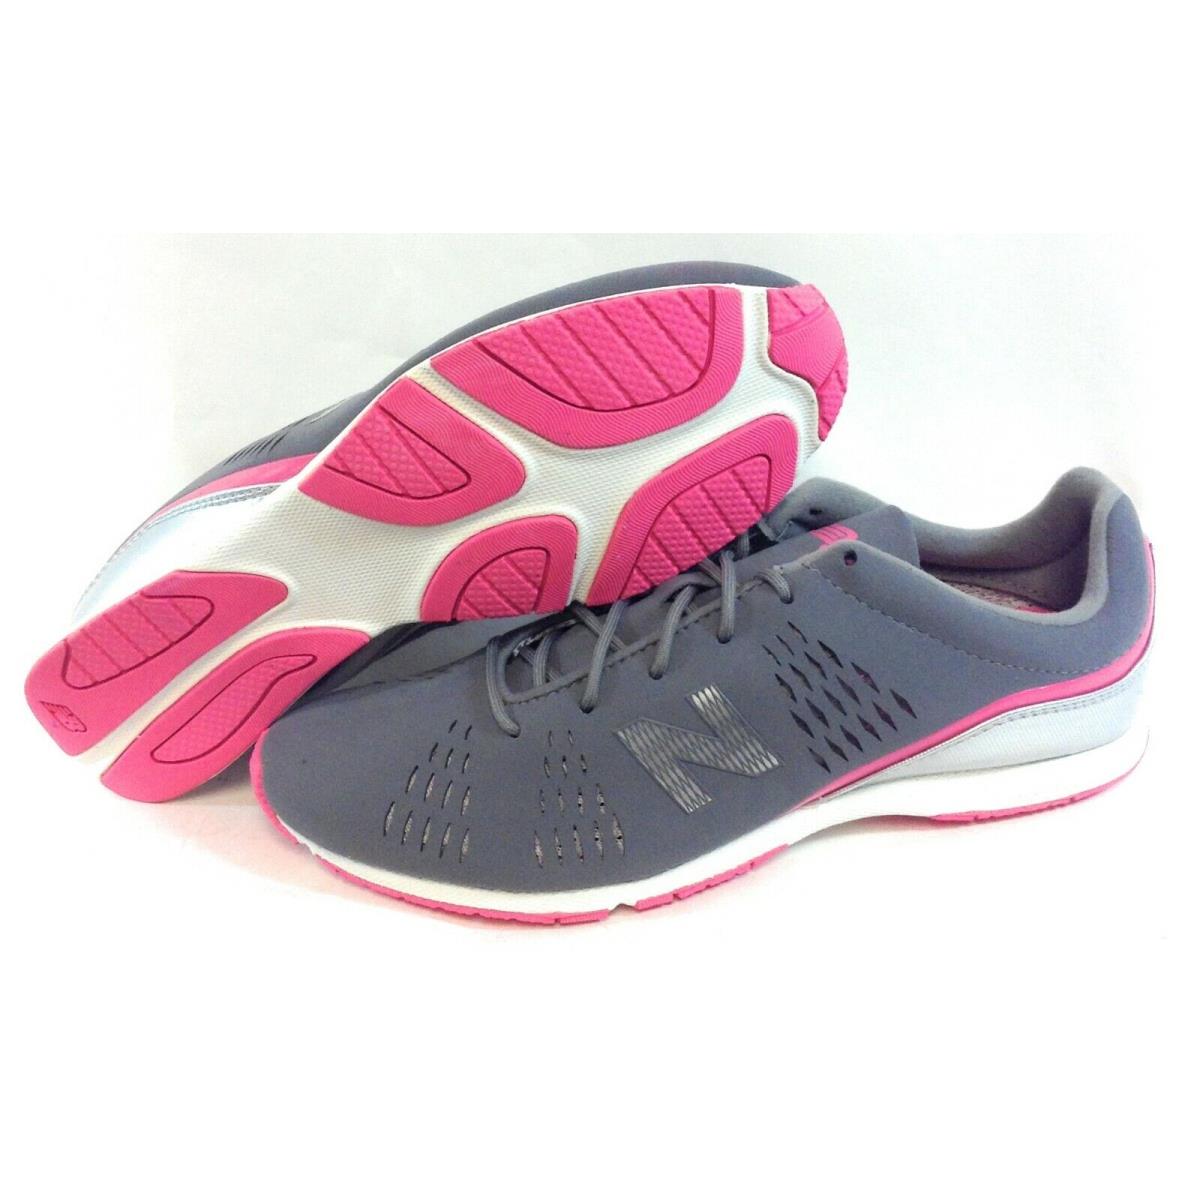 Womens New Balance 773 GP Grey Pink Silver Low Profile Athletic Sneakers Shoes